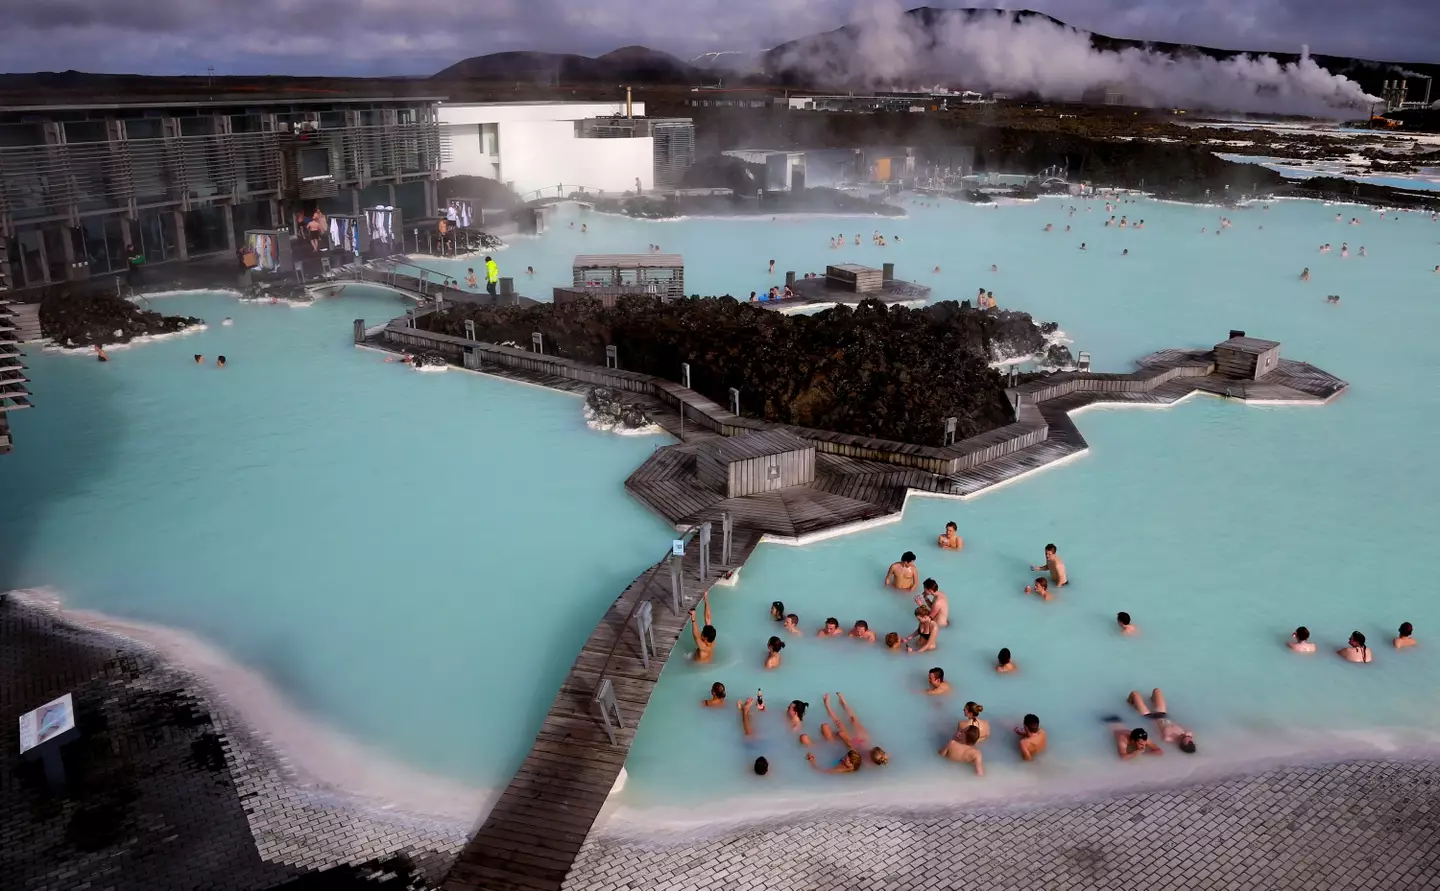 The Blue Lagoon is just 20 minutes from the airport.